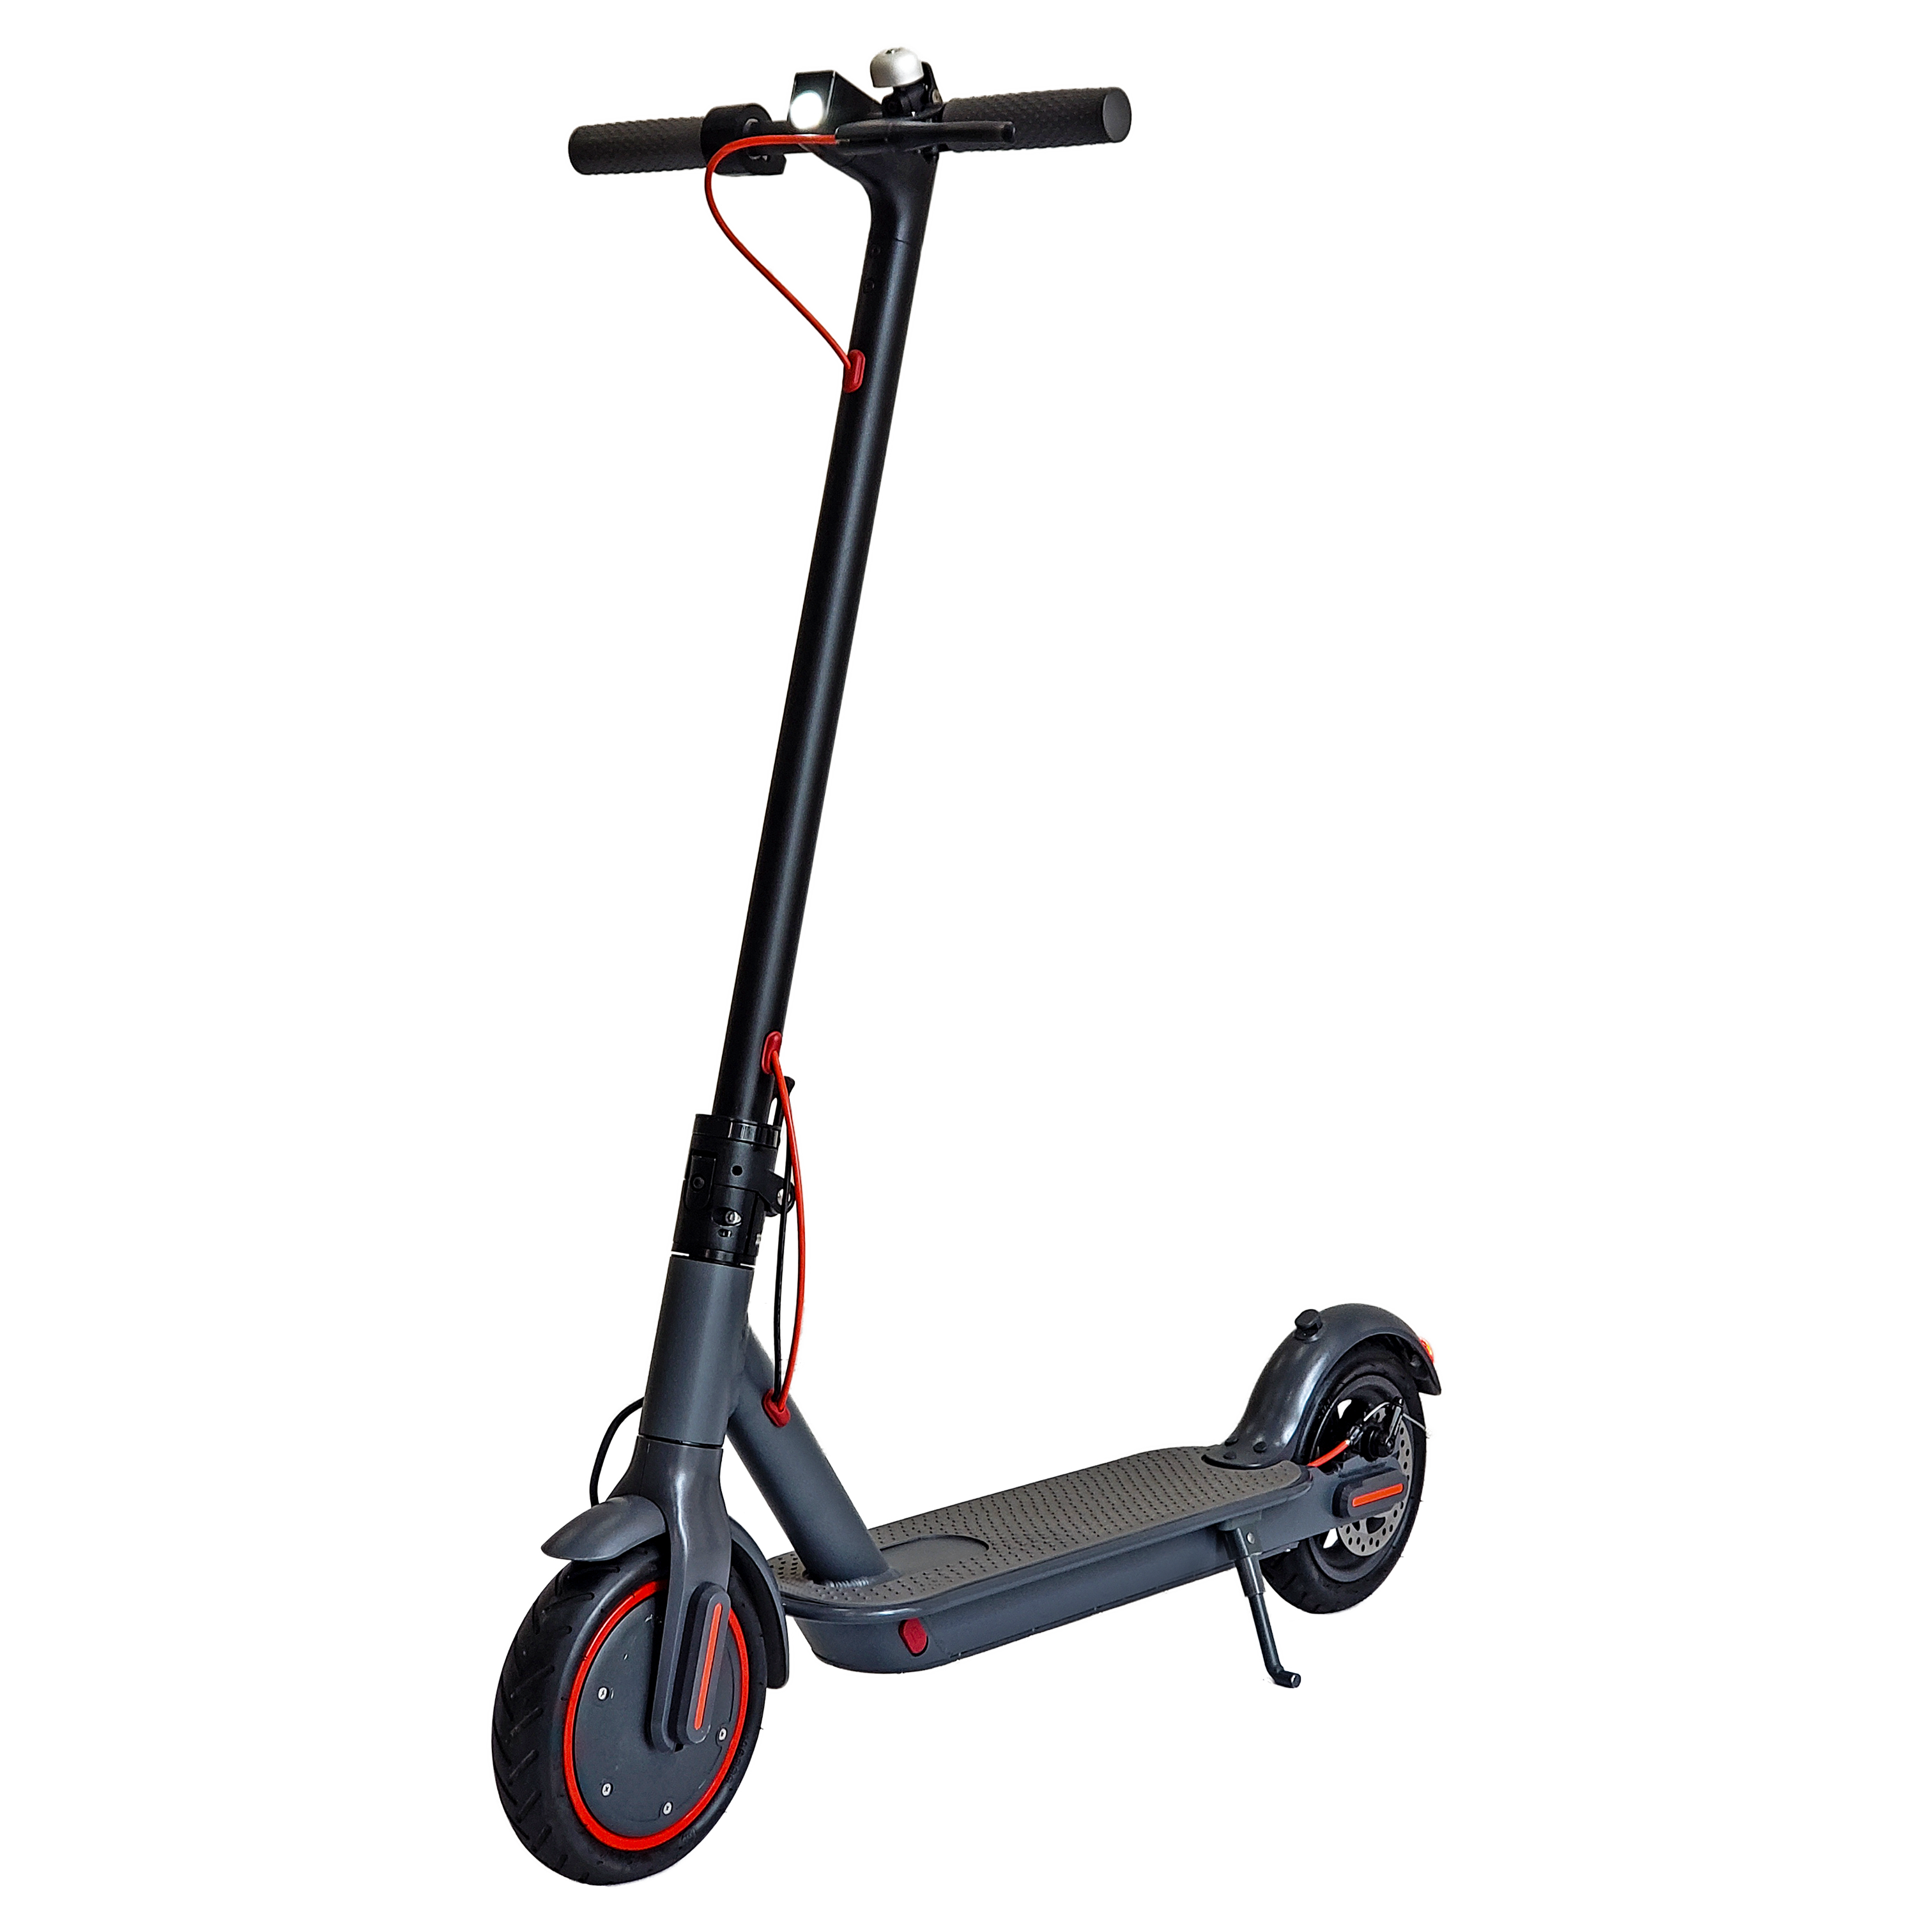 Scooter Electrico Skuter Zl-07s Rojo +8 años [Openbox]